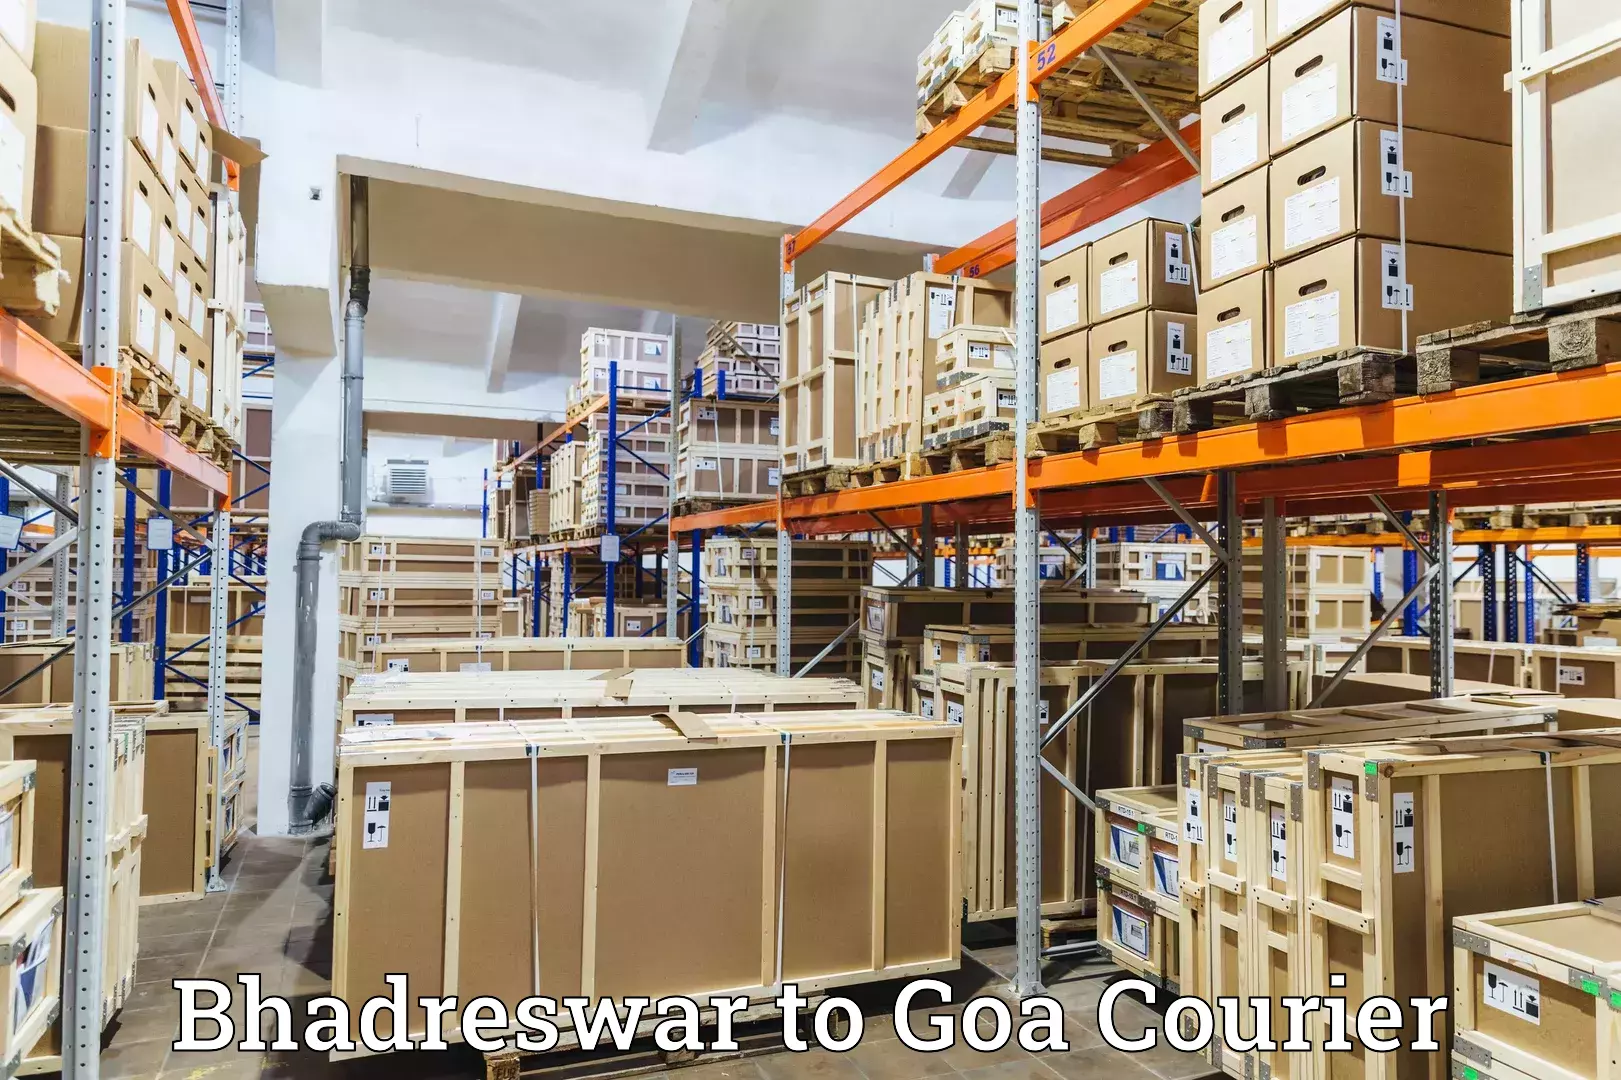 Courier service efficiency Bhadreswar to Bardez